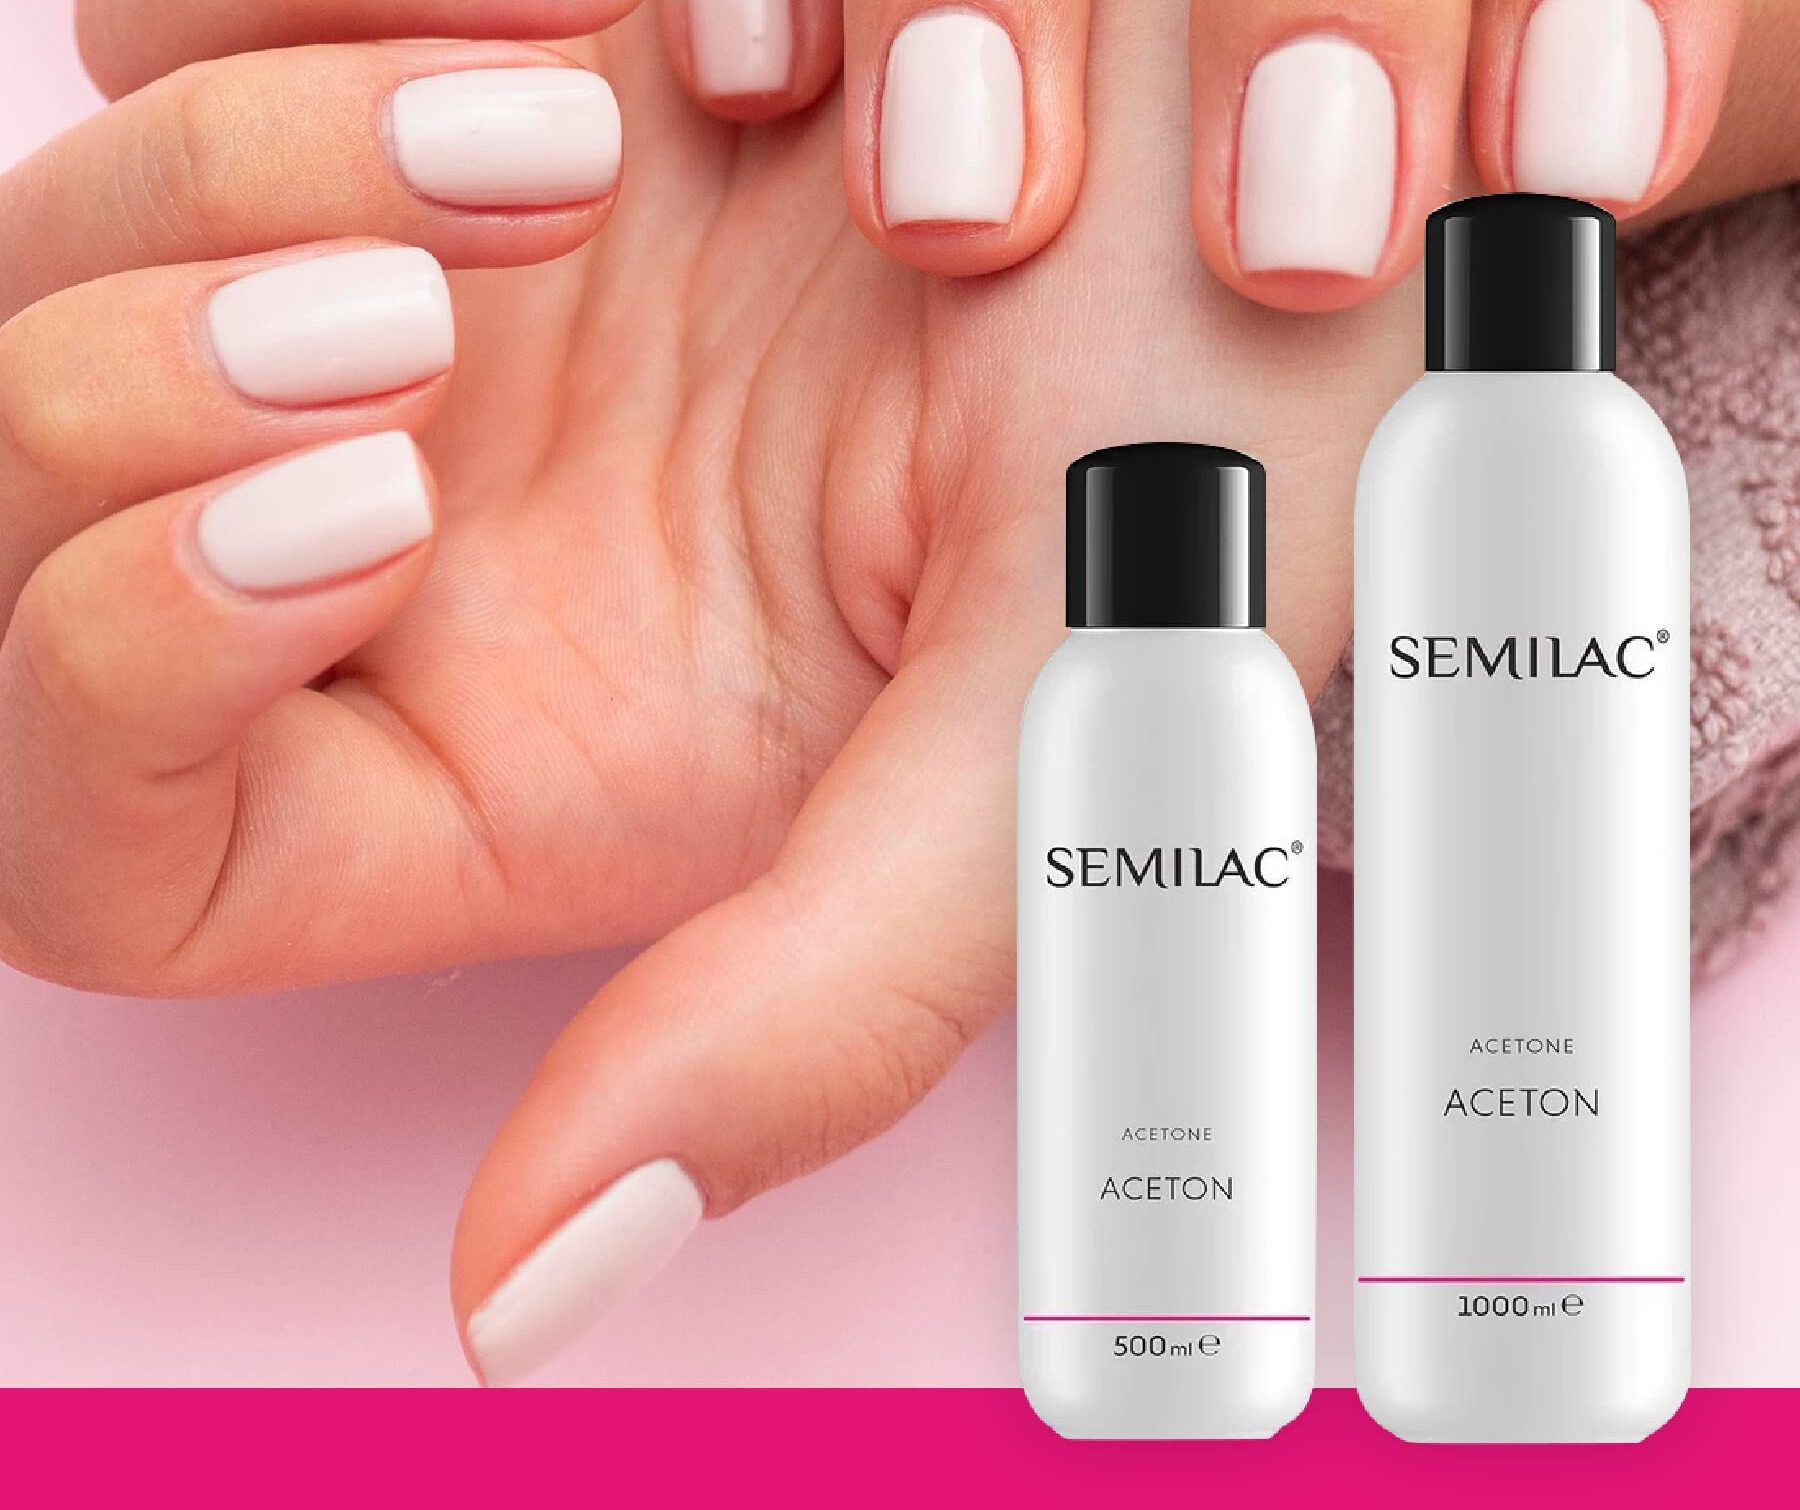 You Will Have Healthy And Beautiful Nails Thanks To “Semilac Acetone”